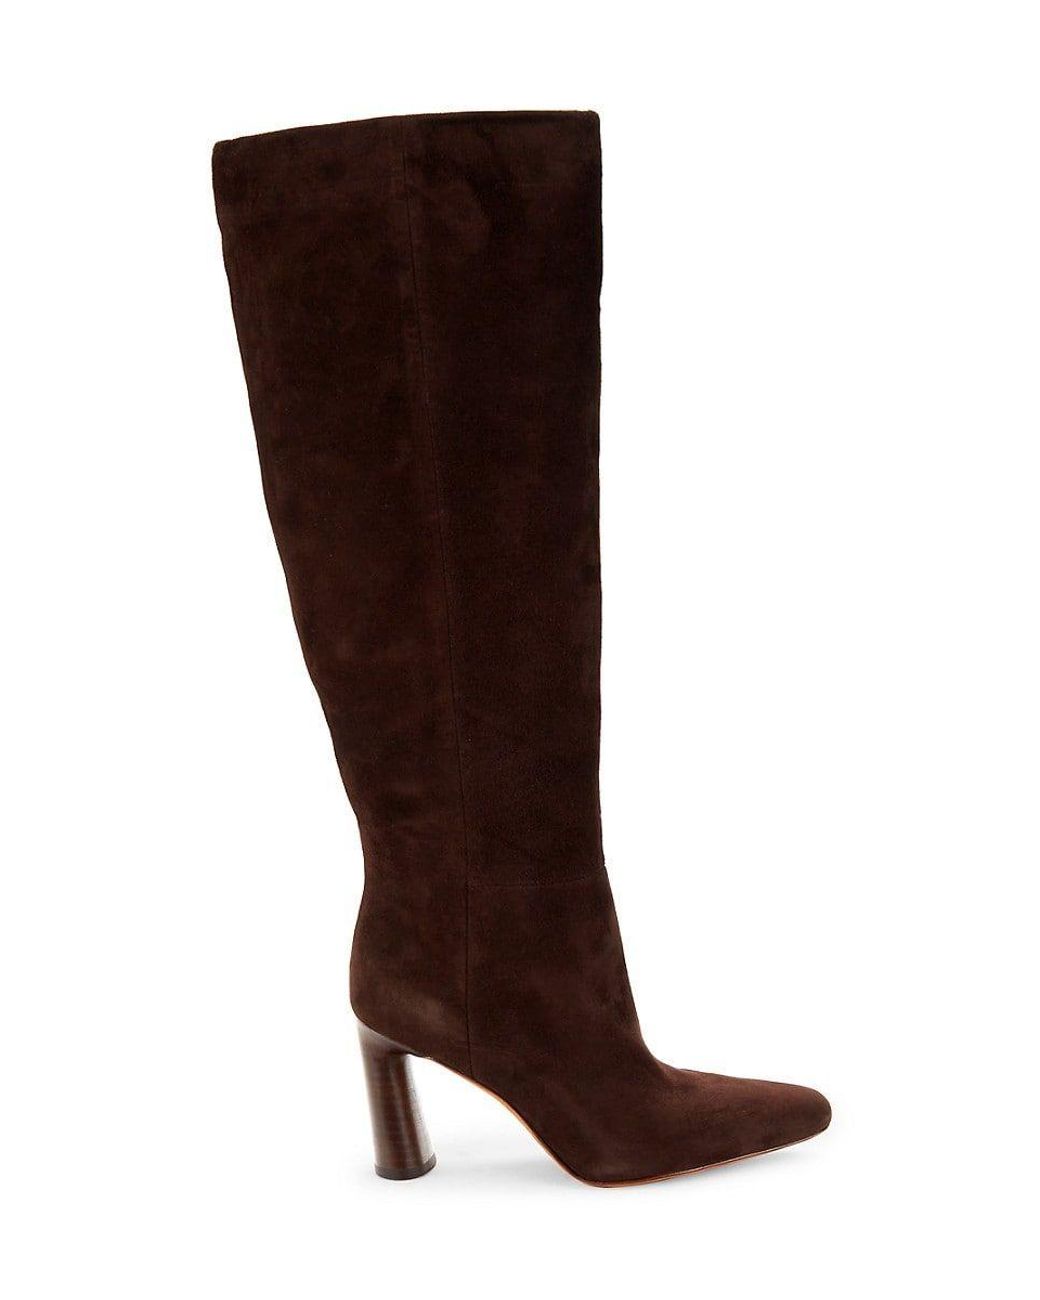 Vince Suede Knee High Boots in Brown | Lyst